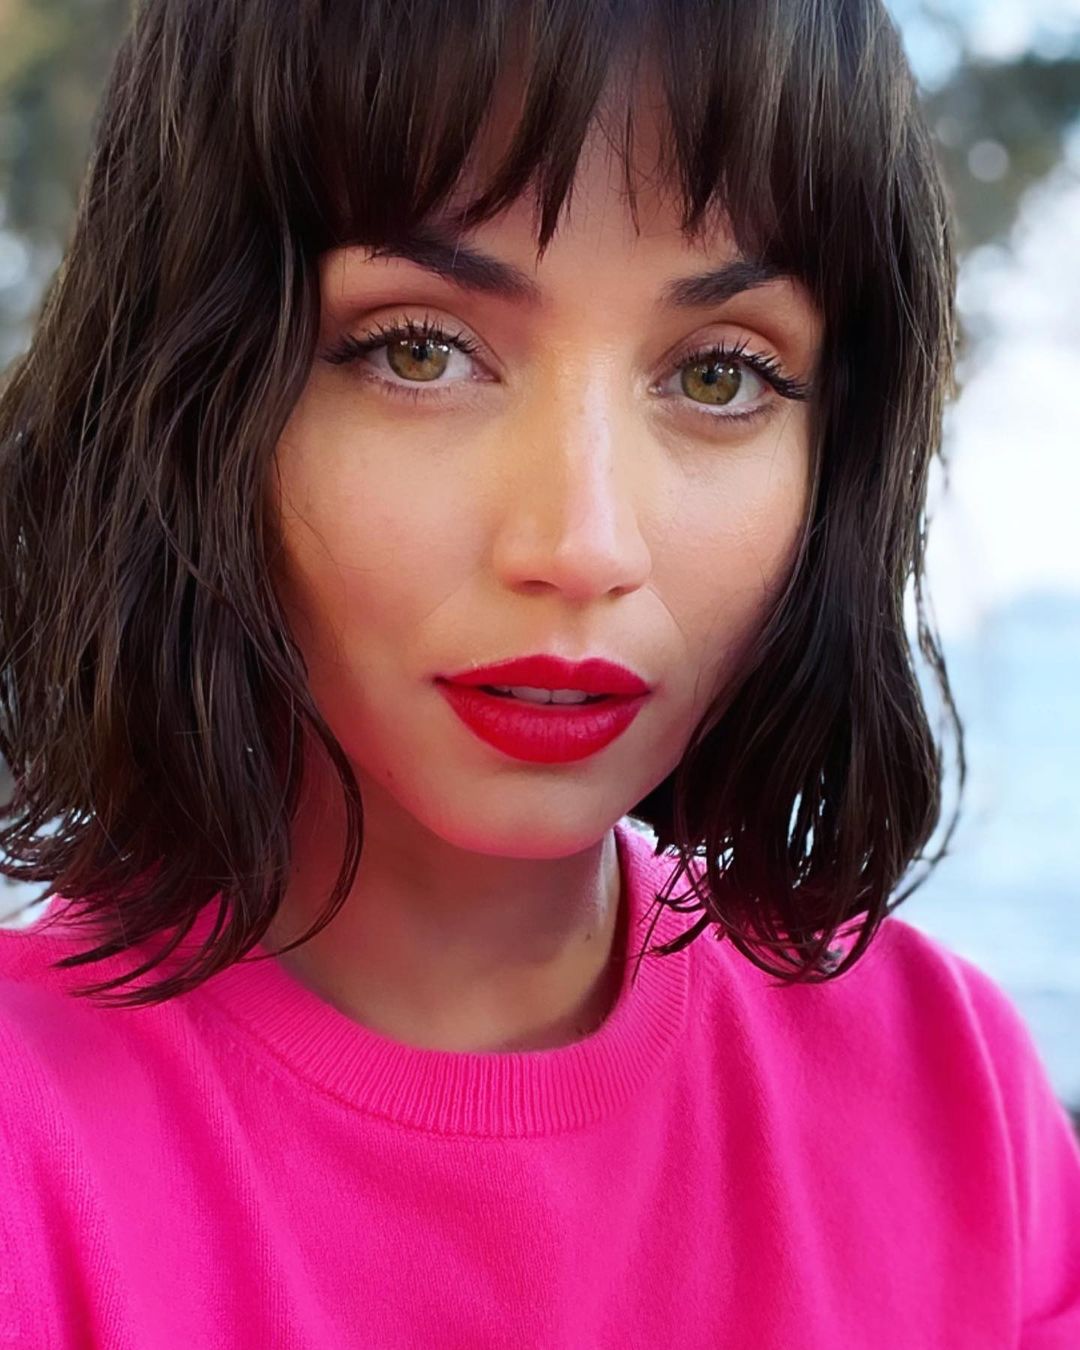 Interview: Ana de Armas on Her Beauty and Skin-Care Routines